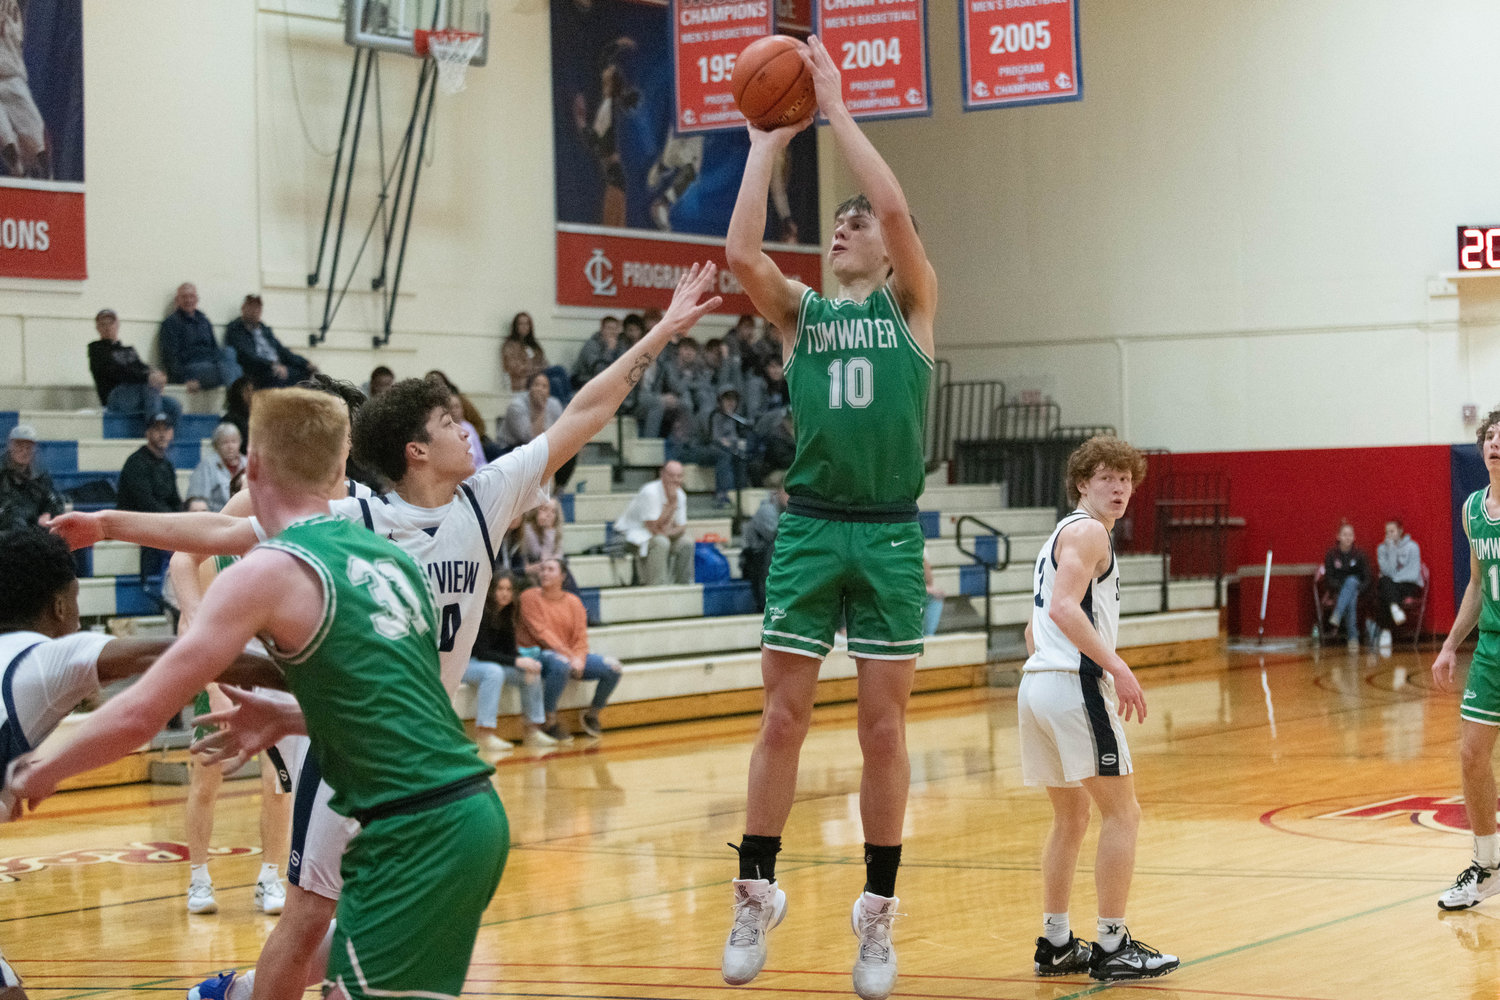 Andrew Collins takes a jumper during the second half of Tumwater's 63-61 win over Skyview on Jan. 16 at LCC's MLK Day Classic in Longview.